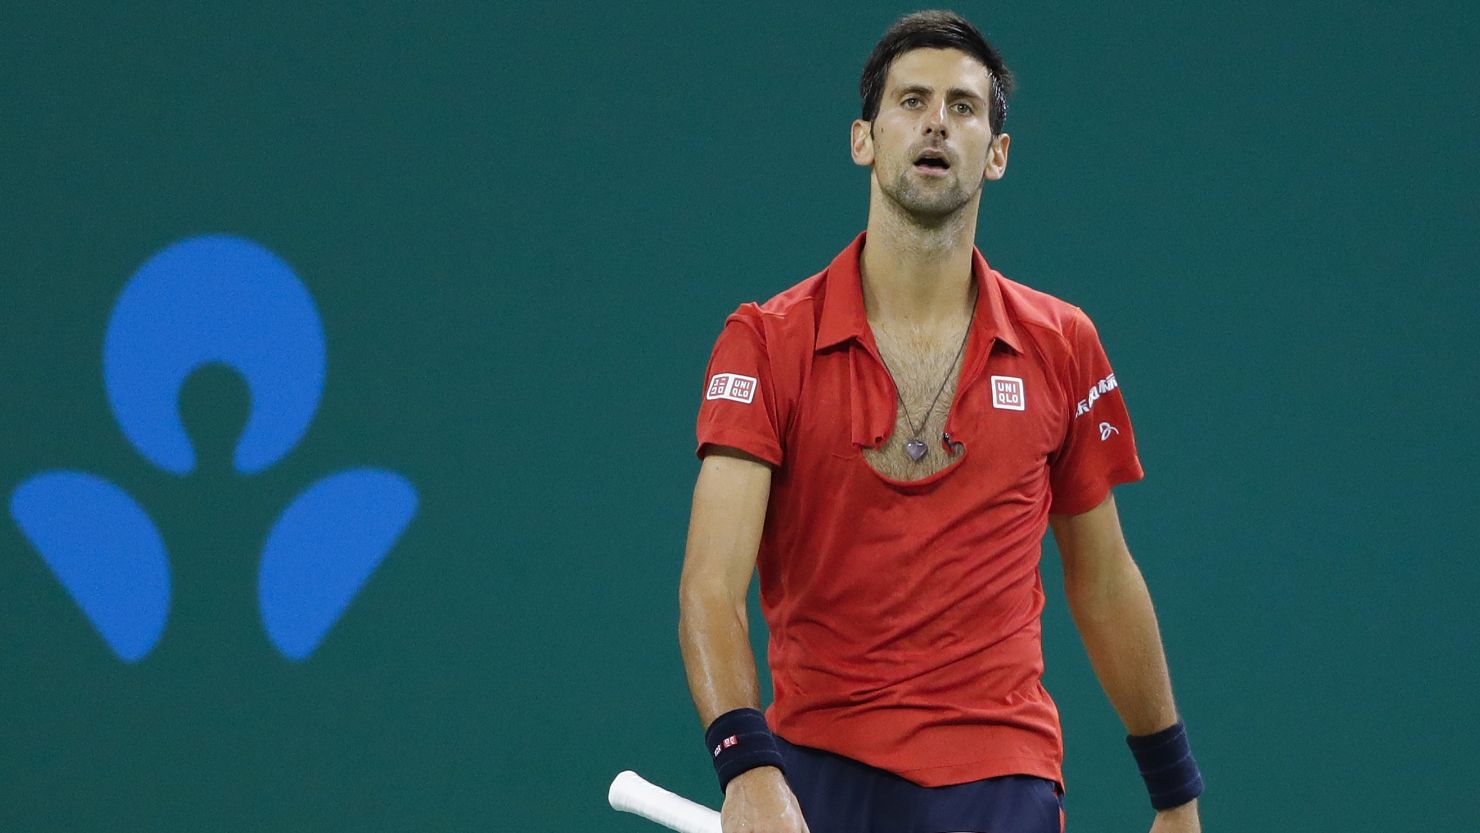 Novak Djokovic tore his shirt in anger after losing a point in his semifinal defeat to Roberto Bautista Agut.